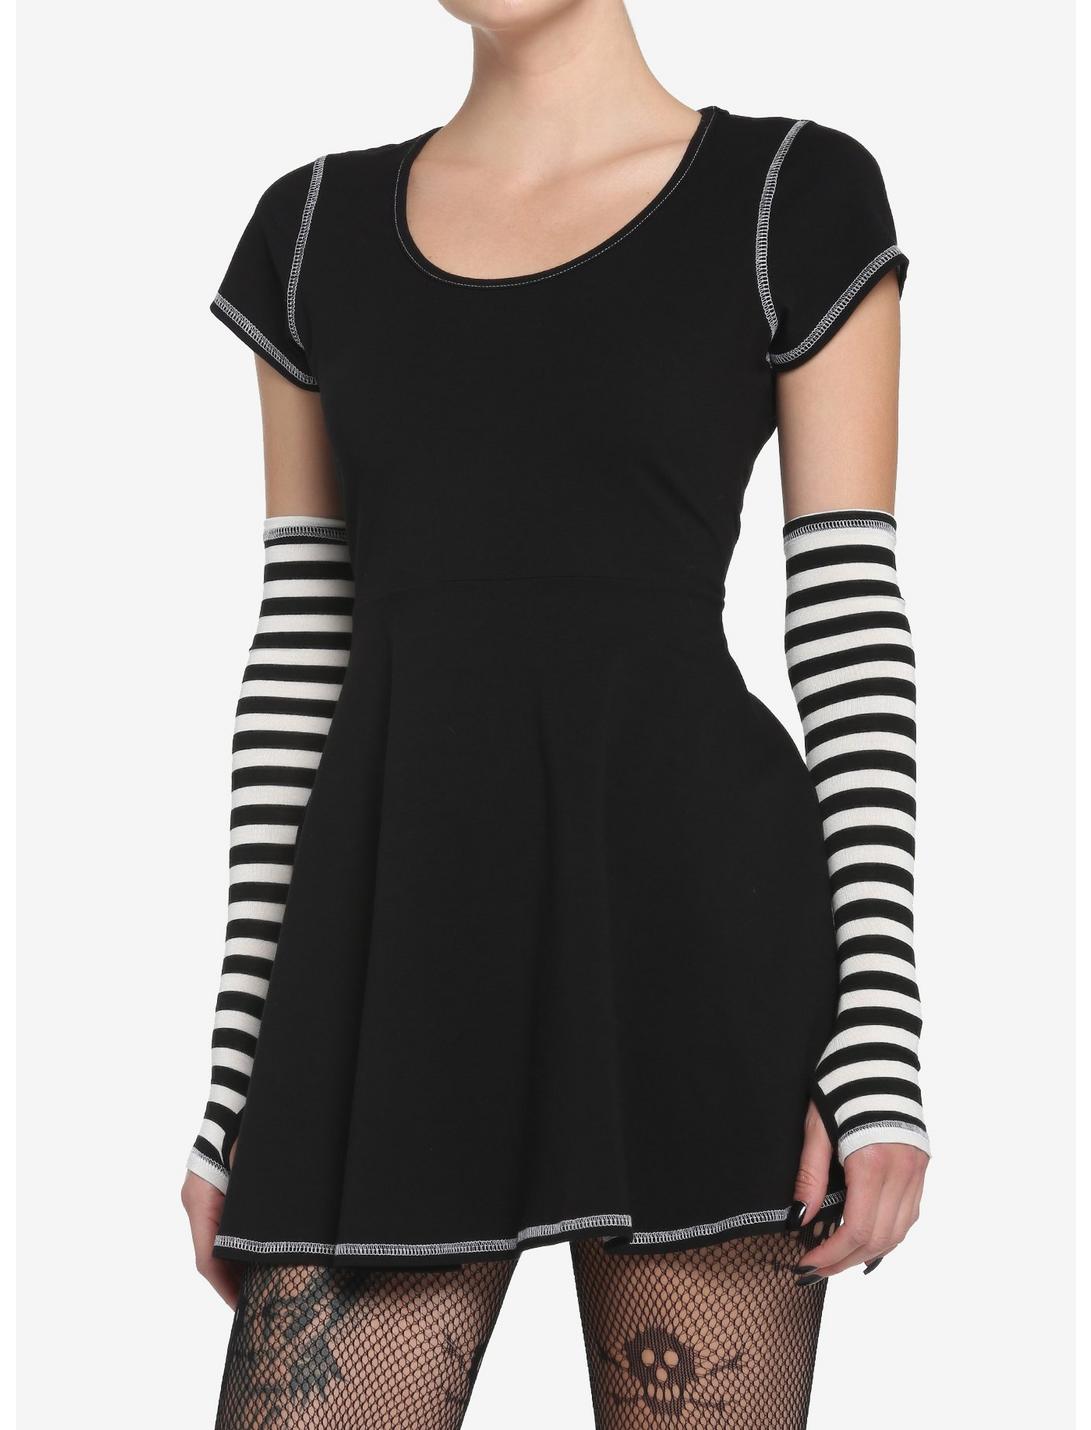 Black & White Contrast Stitch Skater Dress With Arm Warmers, MULTI, hi-res